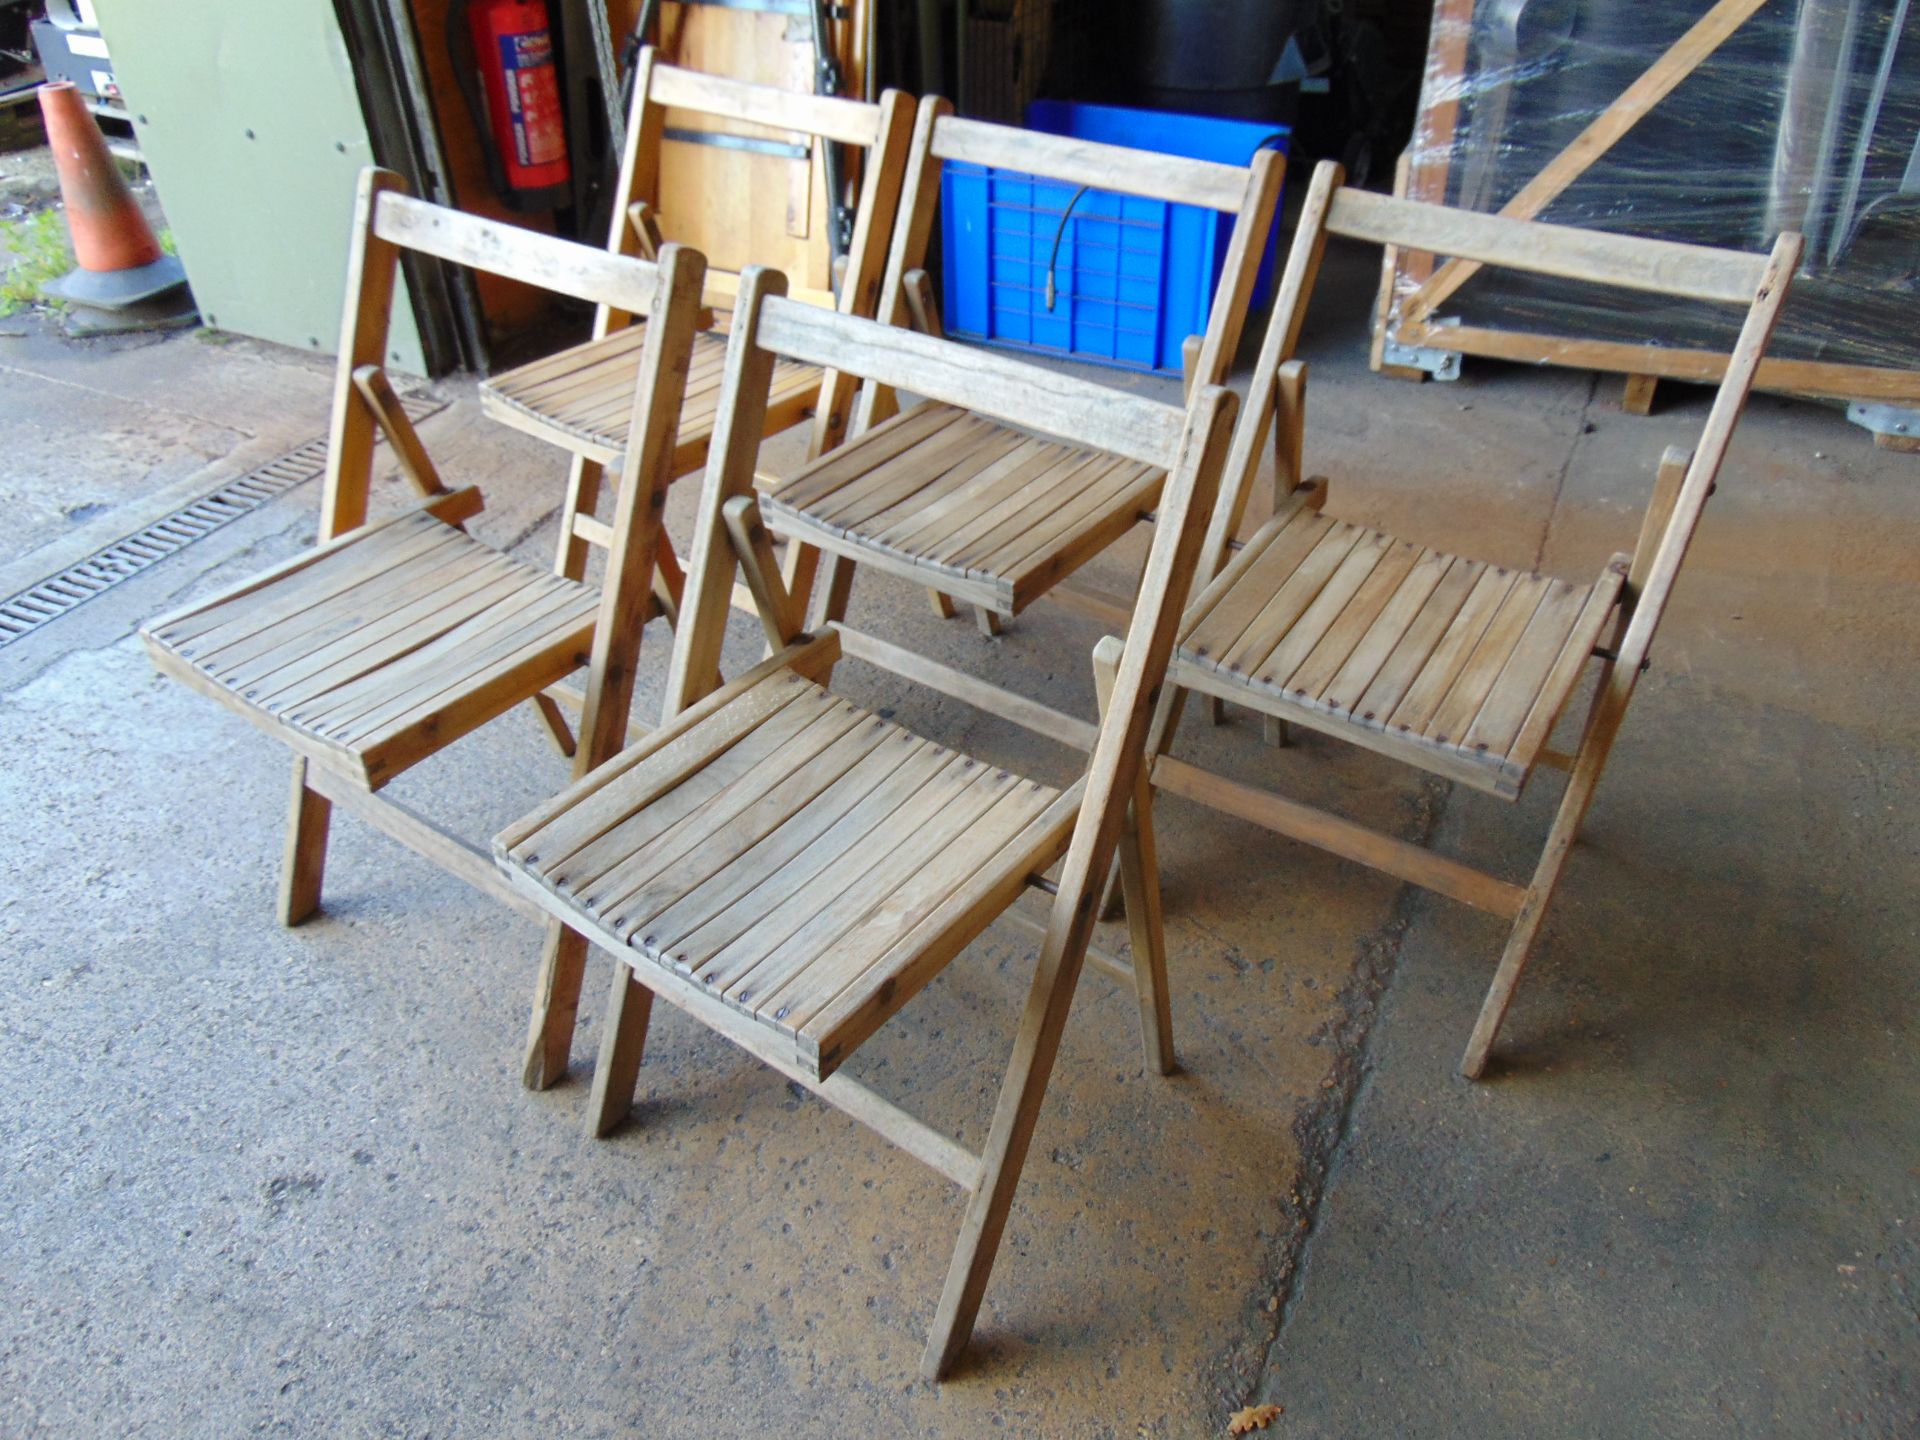 5 x British Army Wooden Folding Camp Chairs - Image 3 of 5